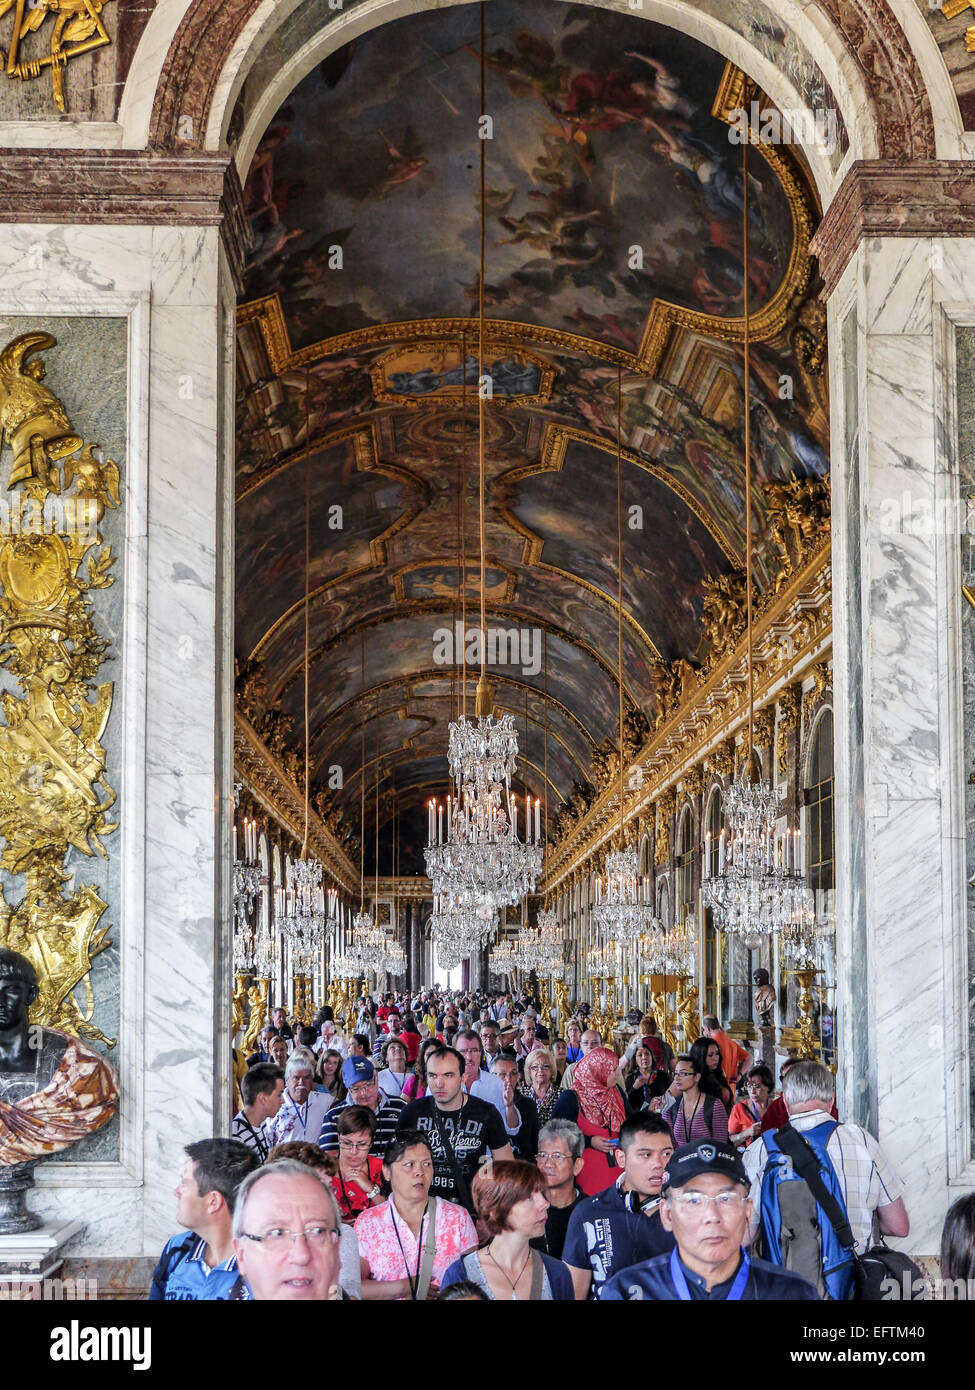 VERSAILLES, FRANCE - AUGUST 28 2013: Versailles, crowds of tourists visiting Palace of Versailles, Hall of Mirrors Stock Photo